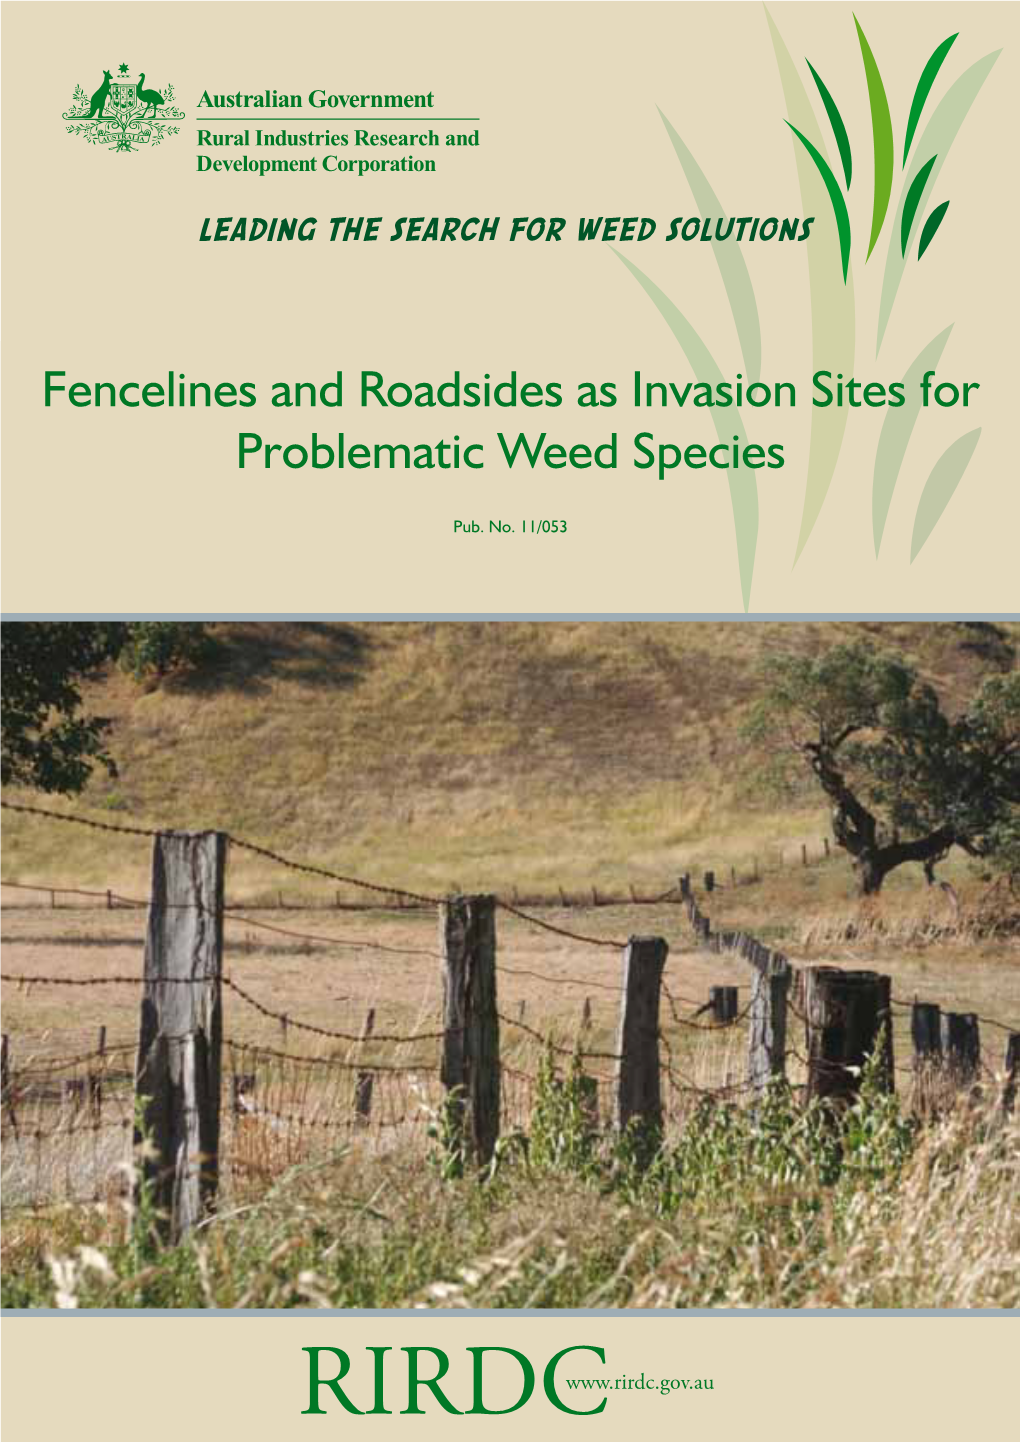 Fencelines and Roadsides As Invasion Sites for Problematic Weed Species